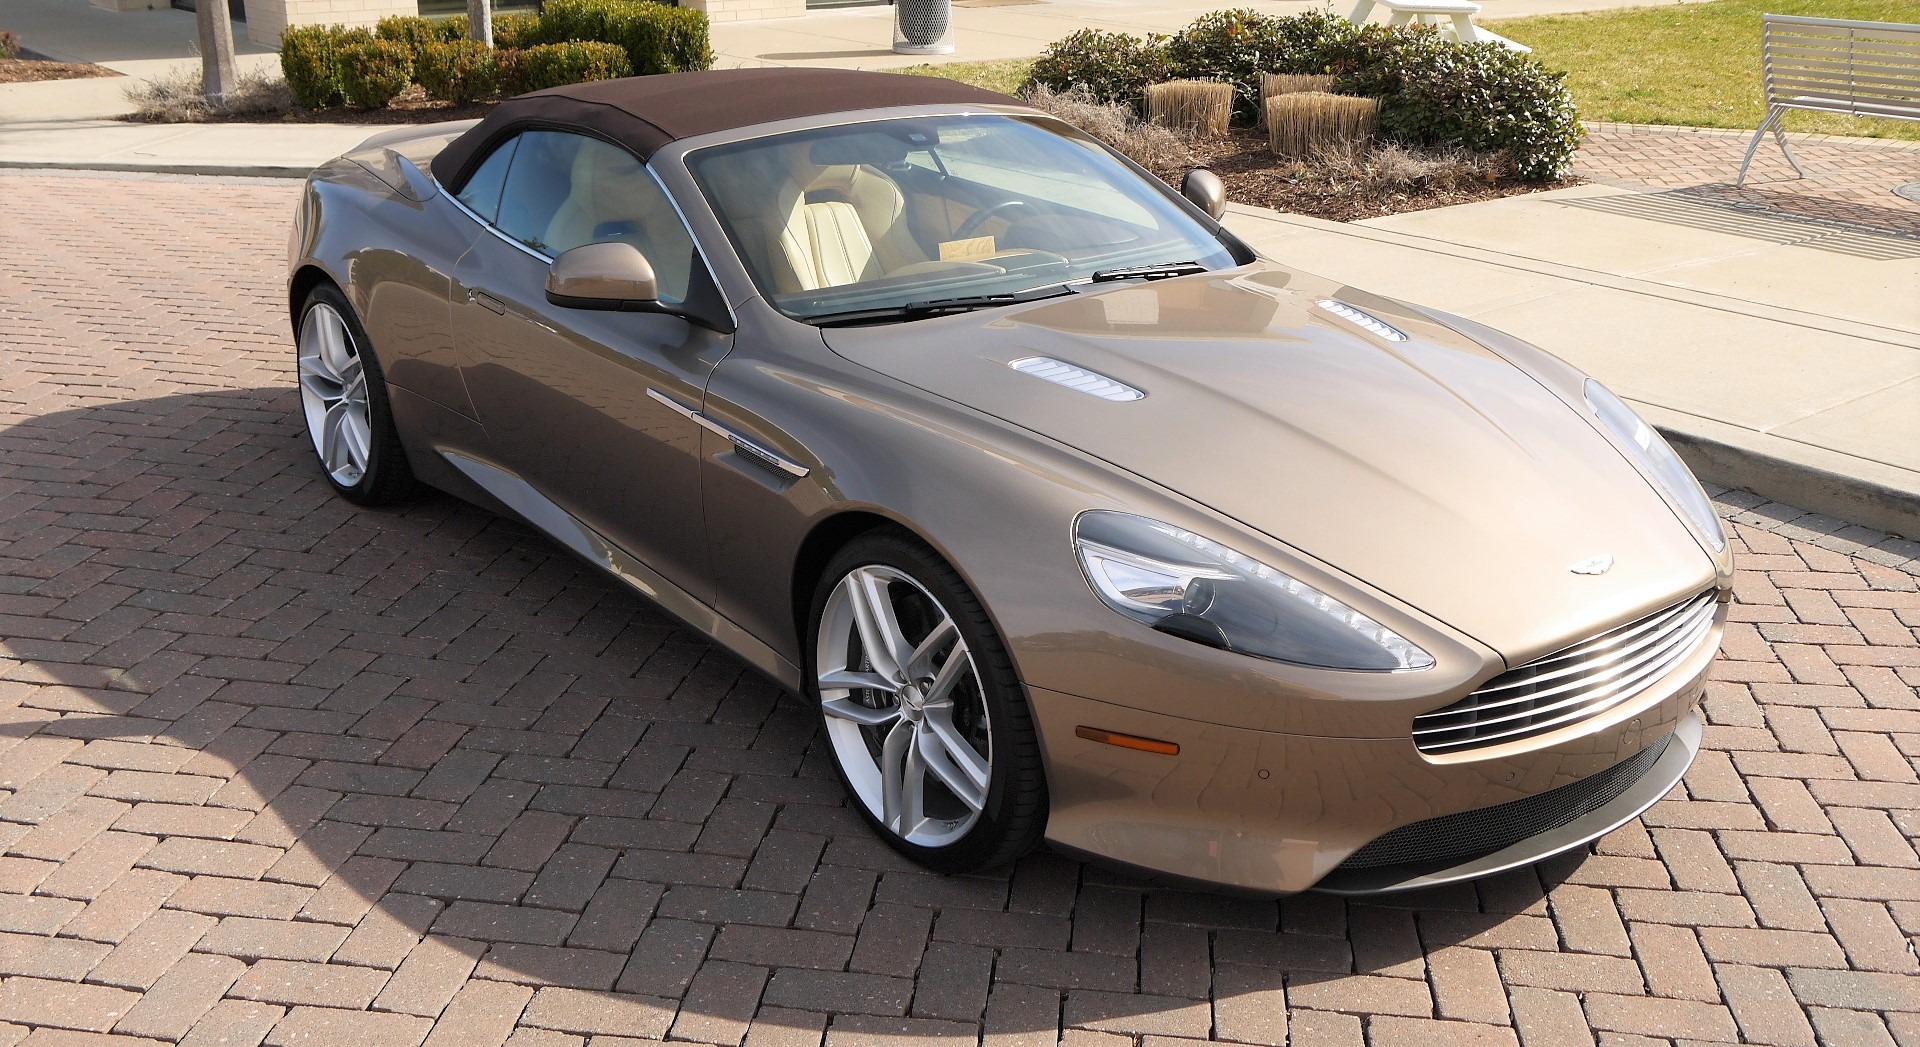 Used 2015 Aston Martin Db9 Volante For Sale Sold Autobahn South Stock 6660